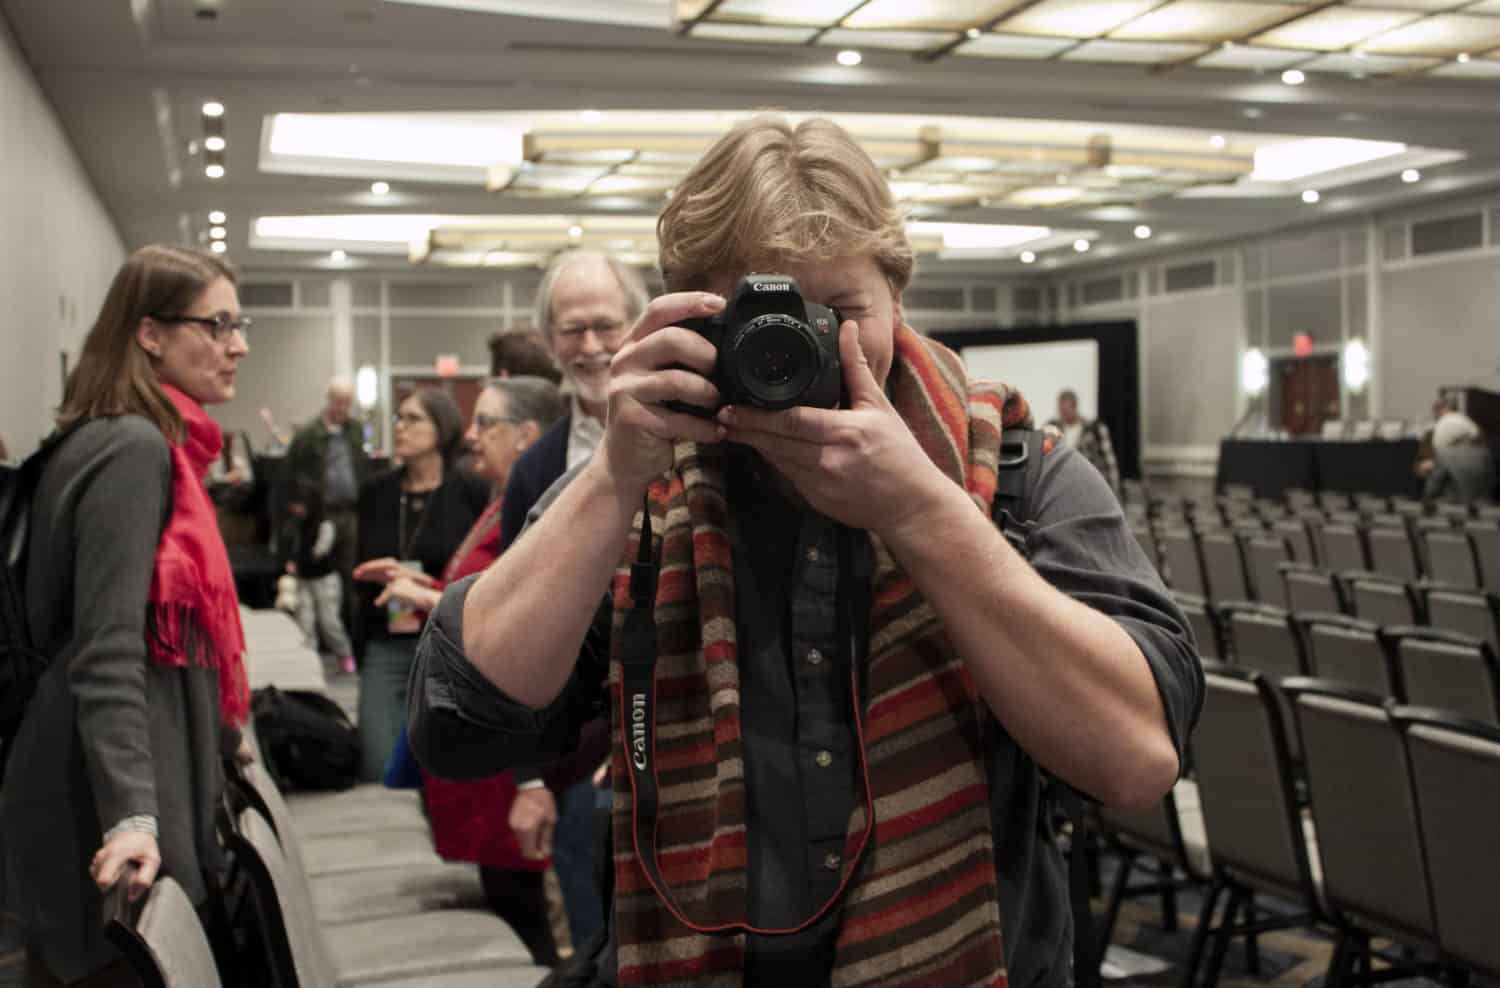 A young man points a camera into the camera in a hotel ballroom. People chat in the background.